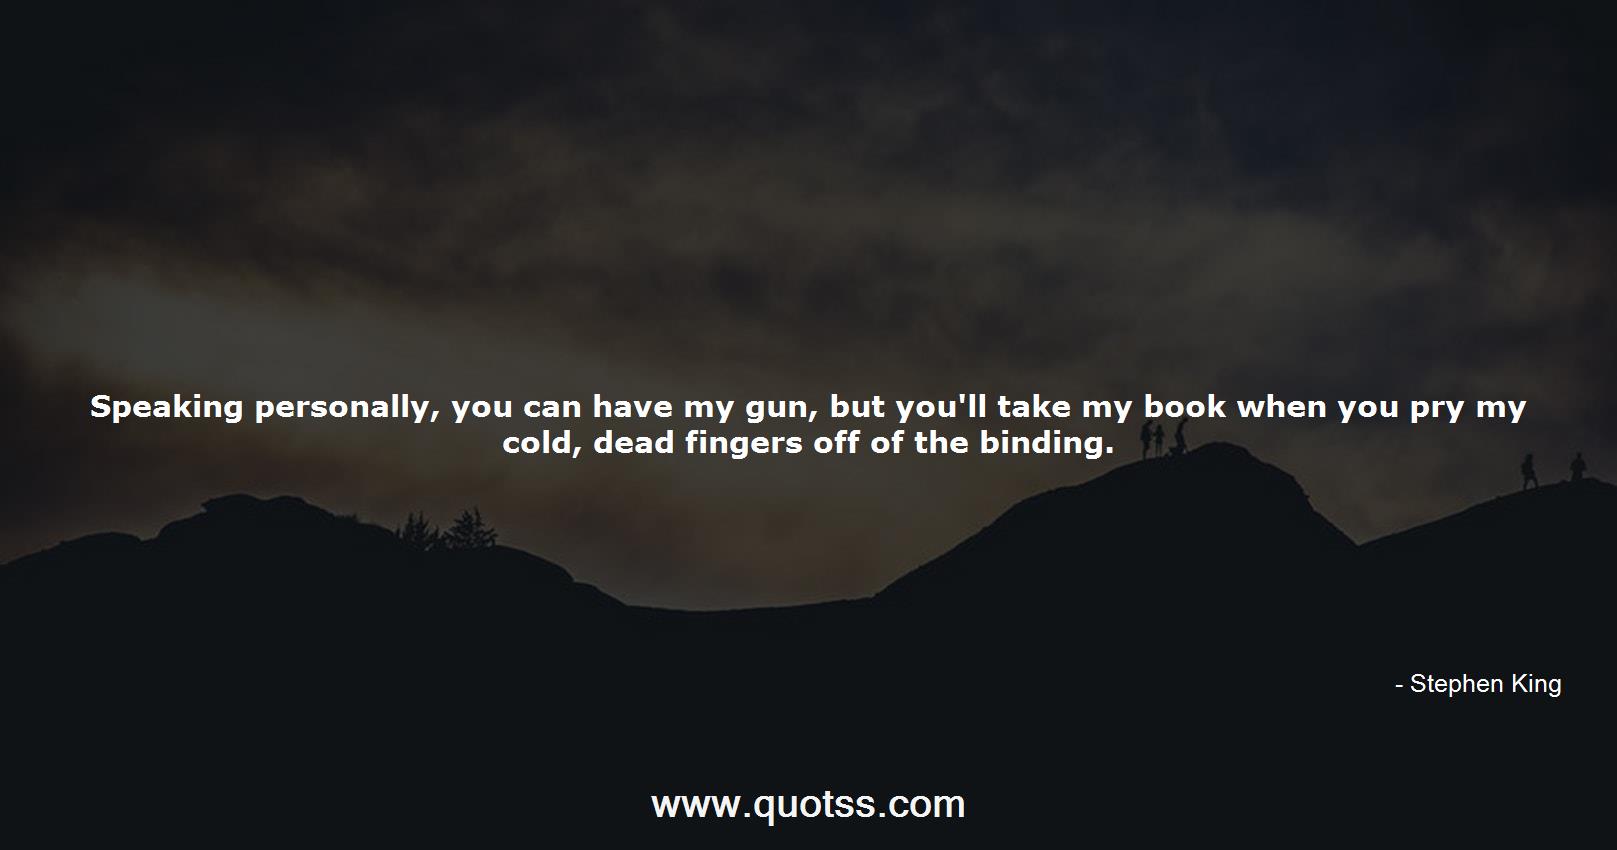 Stephen King Quote on Quotss